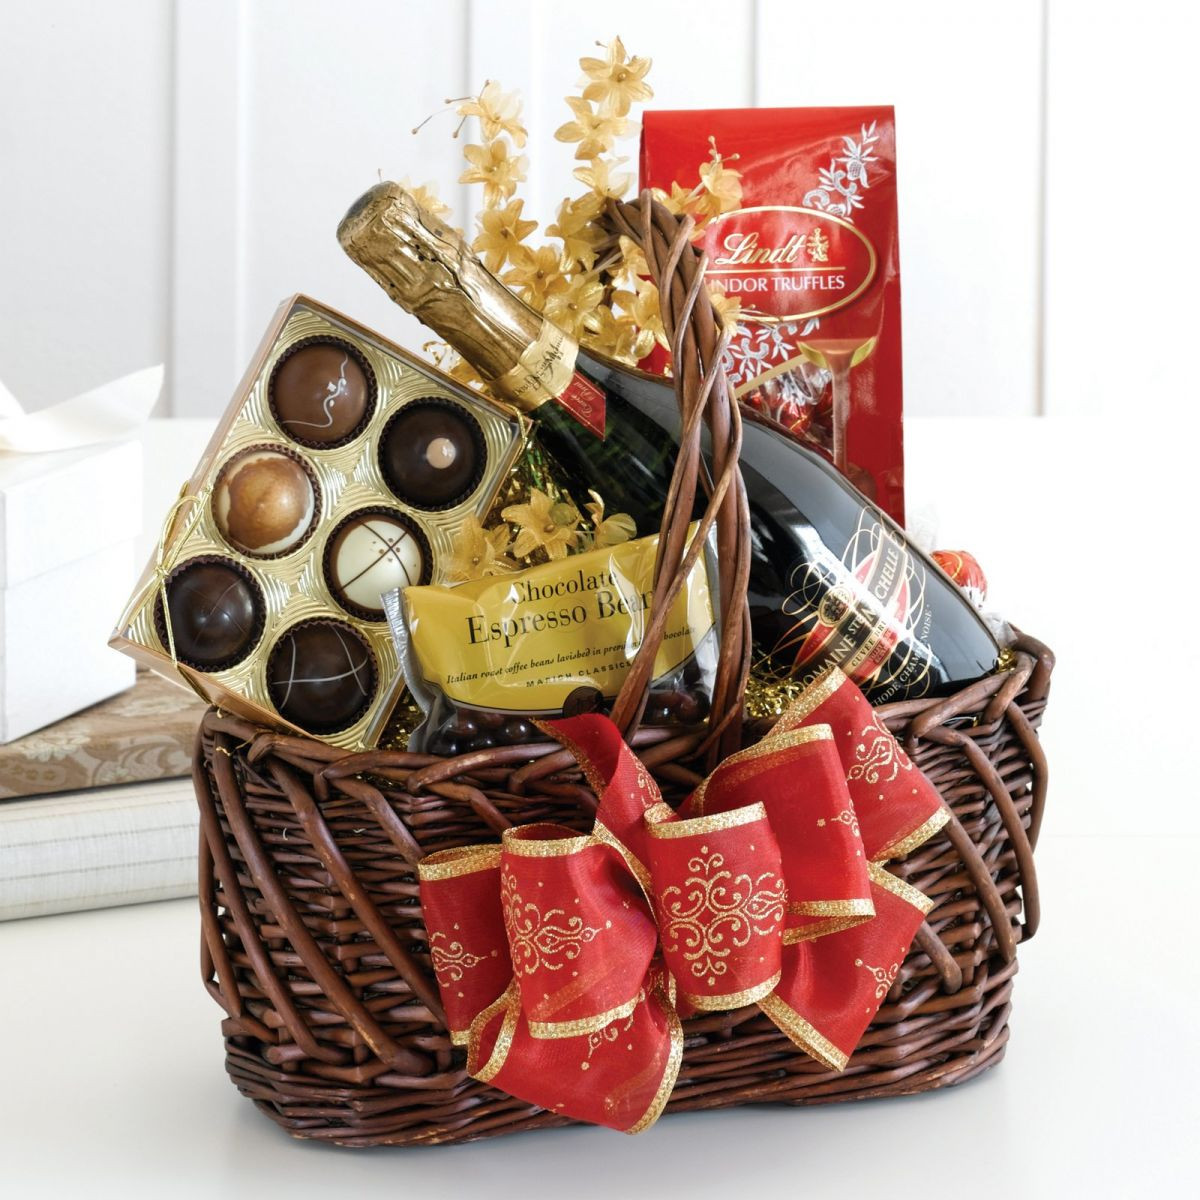 Chocolate Gift Basket Ideas
 Collectibles And Gifts Chocolate Gift Basket Ideas